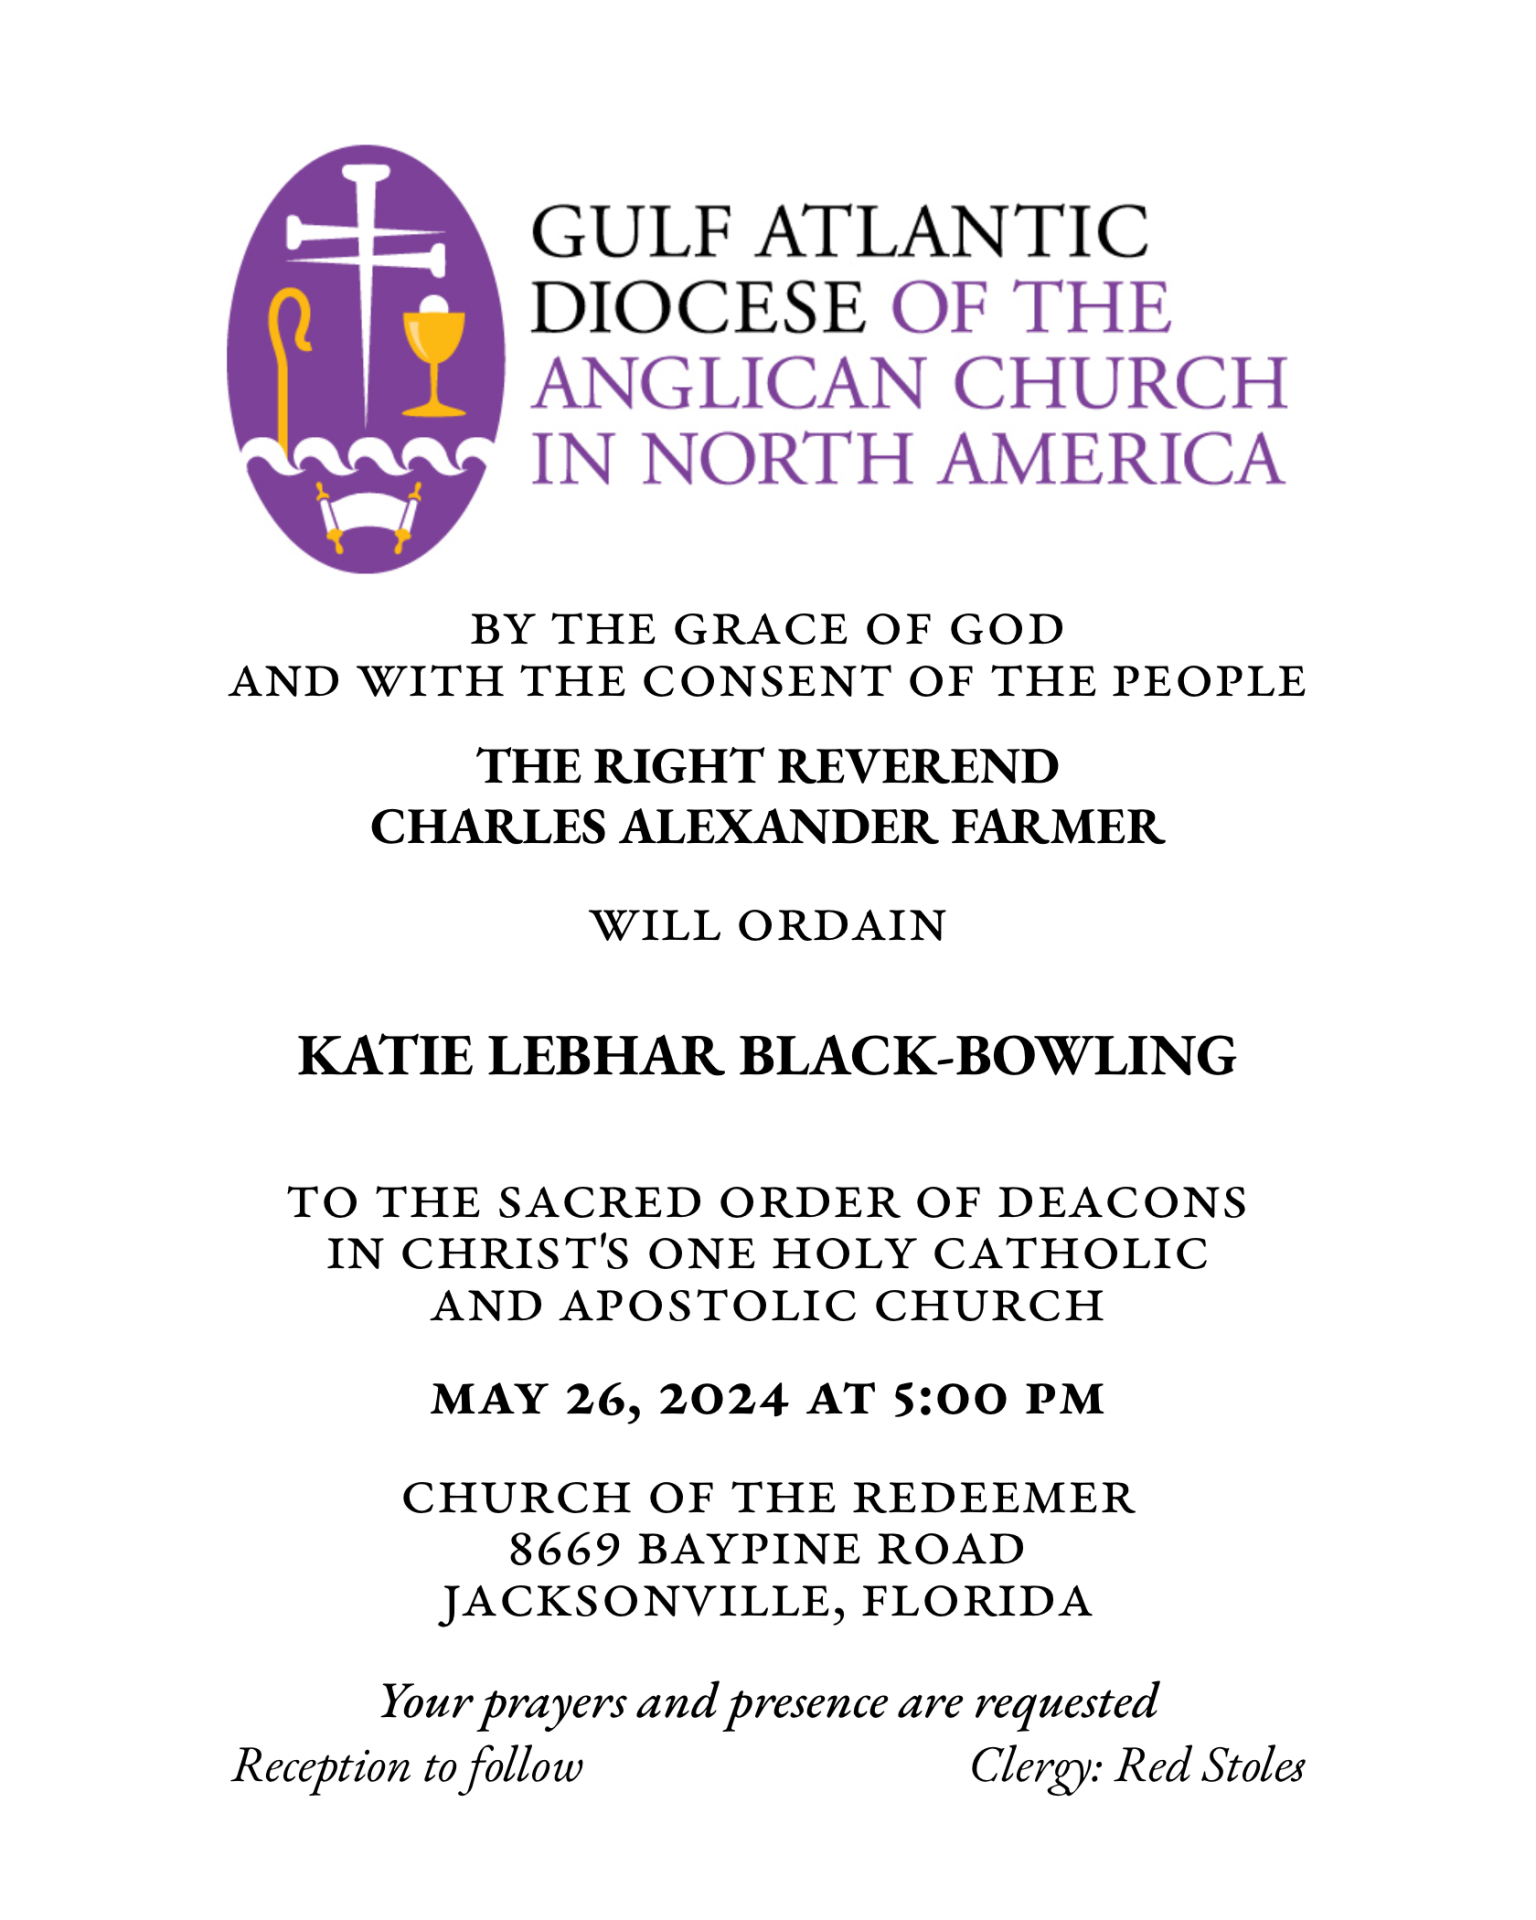 By the Grace of God
and with the consent of the People
THE RIGHT REVEREND
CHARLES ALEXANDER FARMER
will ordain
KATIE LEBHAR BLACK-BOWLING
to the Sacred Order of Deacons
in Christ's One Holy Catholic and Apostolic Church
May 26, 2024 at 5:00 p.m.
Church of the Redeemer
8669 Baypine Road
Jacksonville, Florida
Your prayers and presence are requested